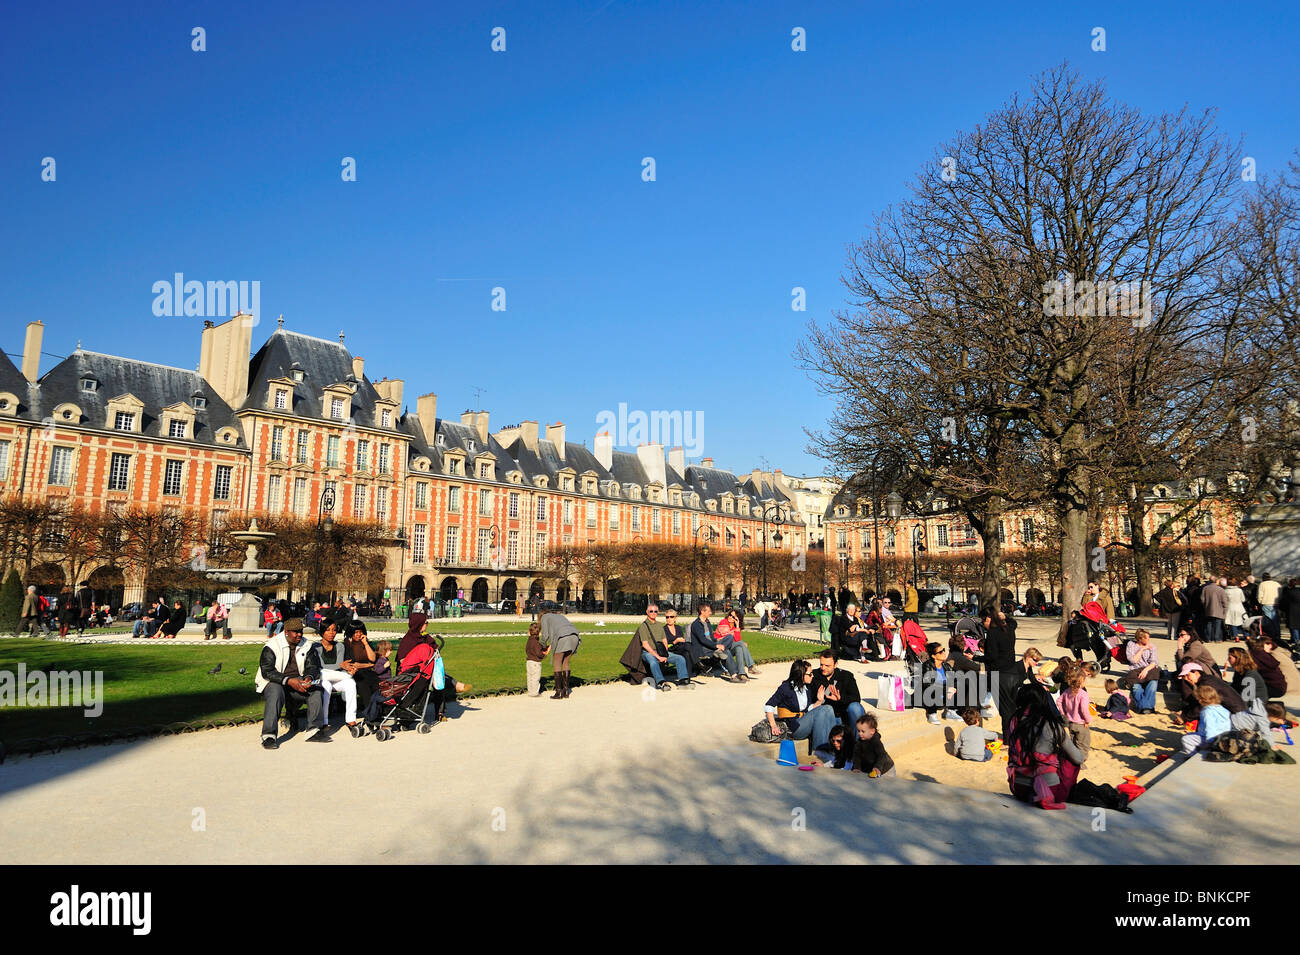 3rd arrondissement 4th arrondissement architecture blue sky day daytime europe exterior fourth arrondissement france french Stock Photo